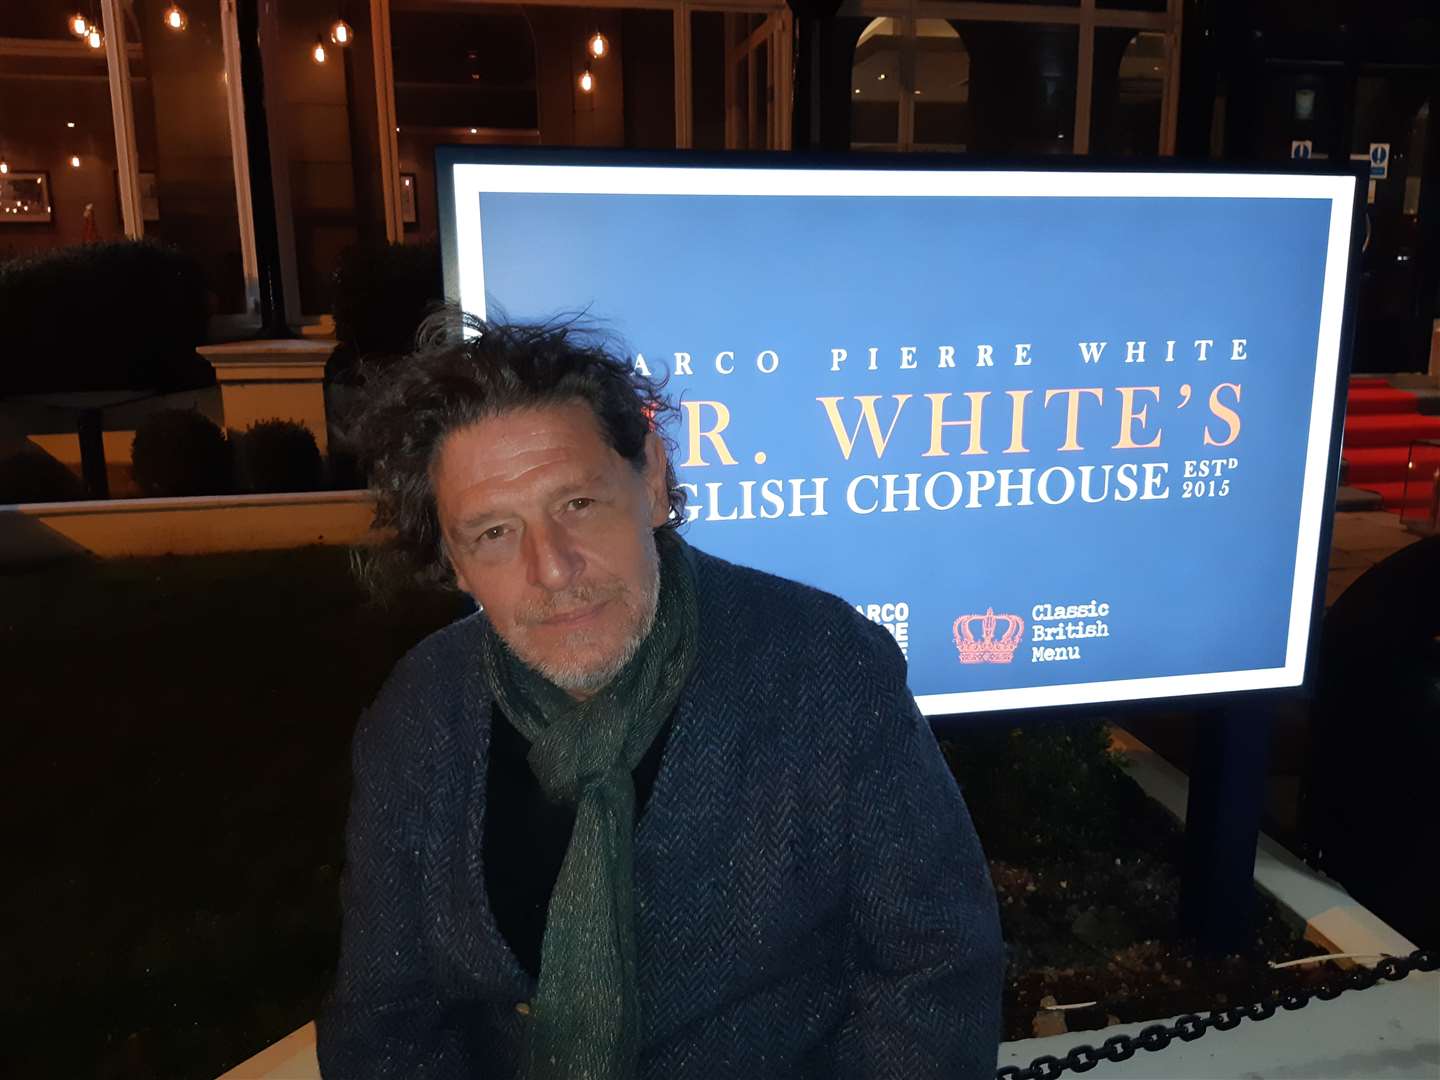 Marco Pierre White was in Dover this week